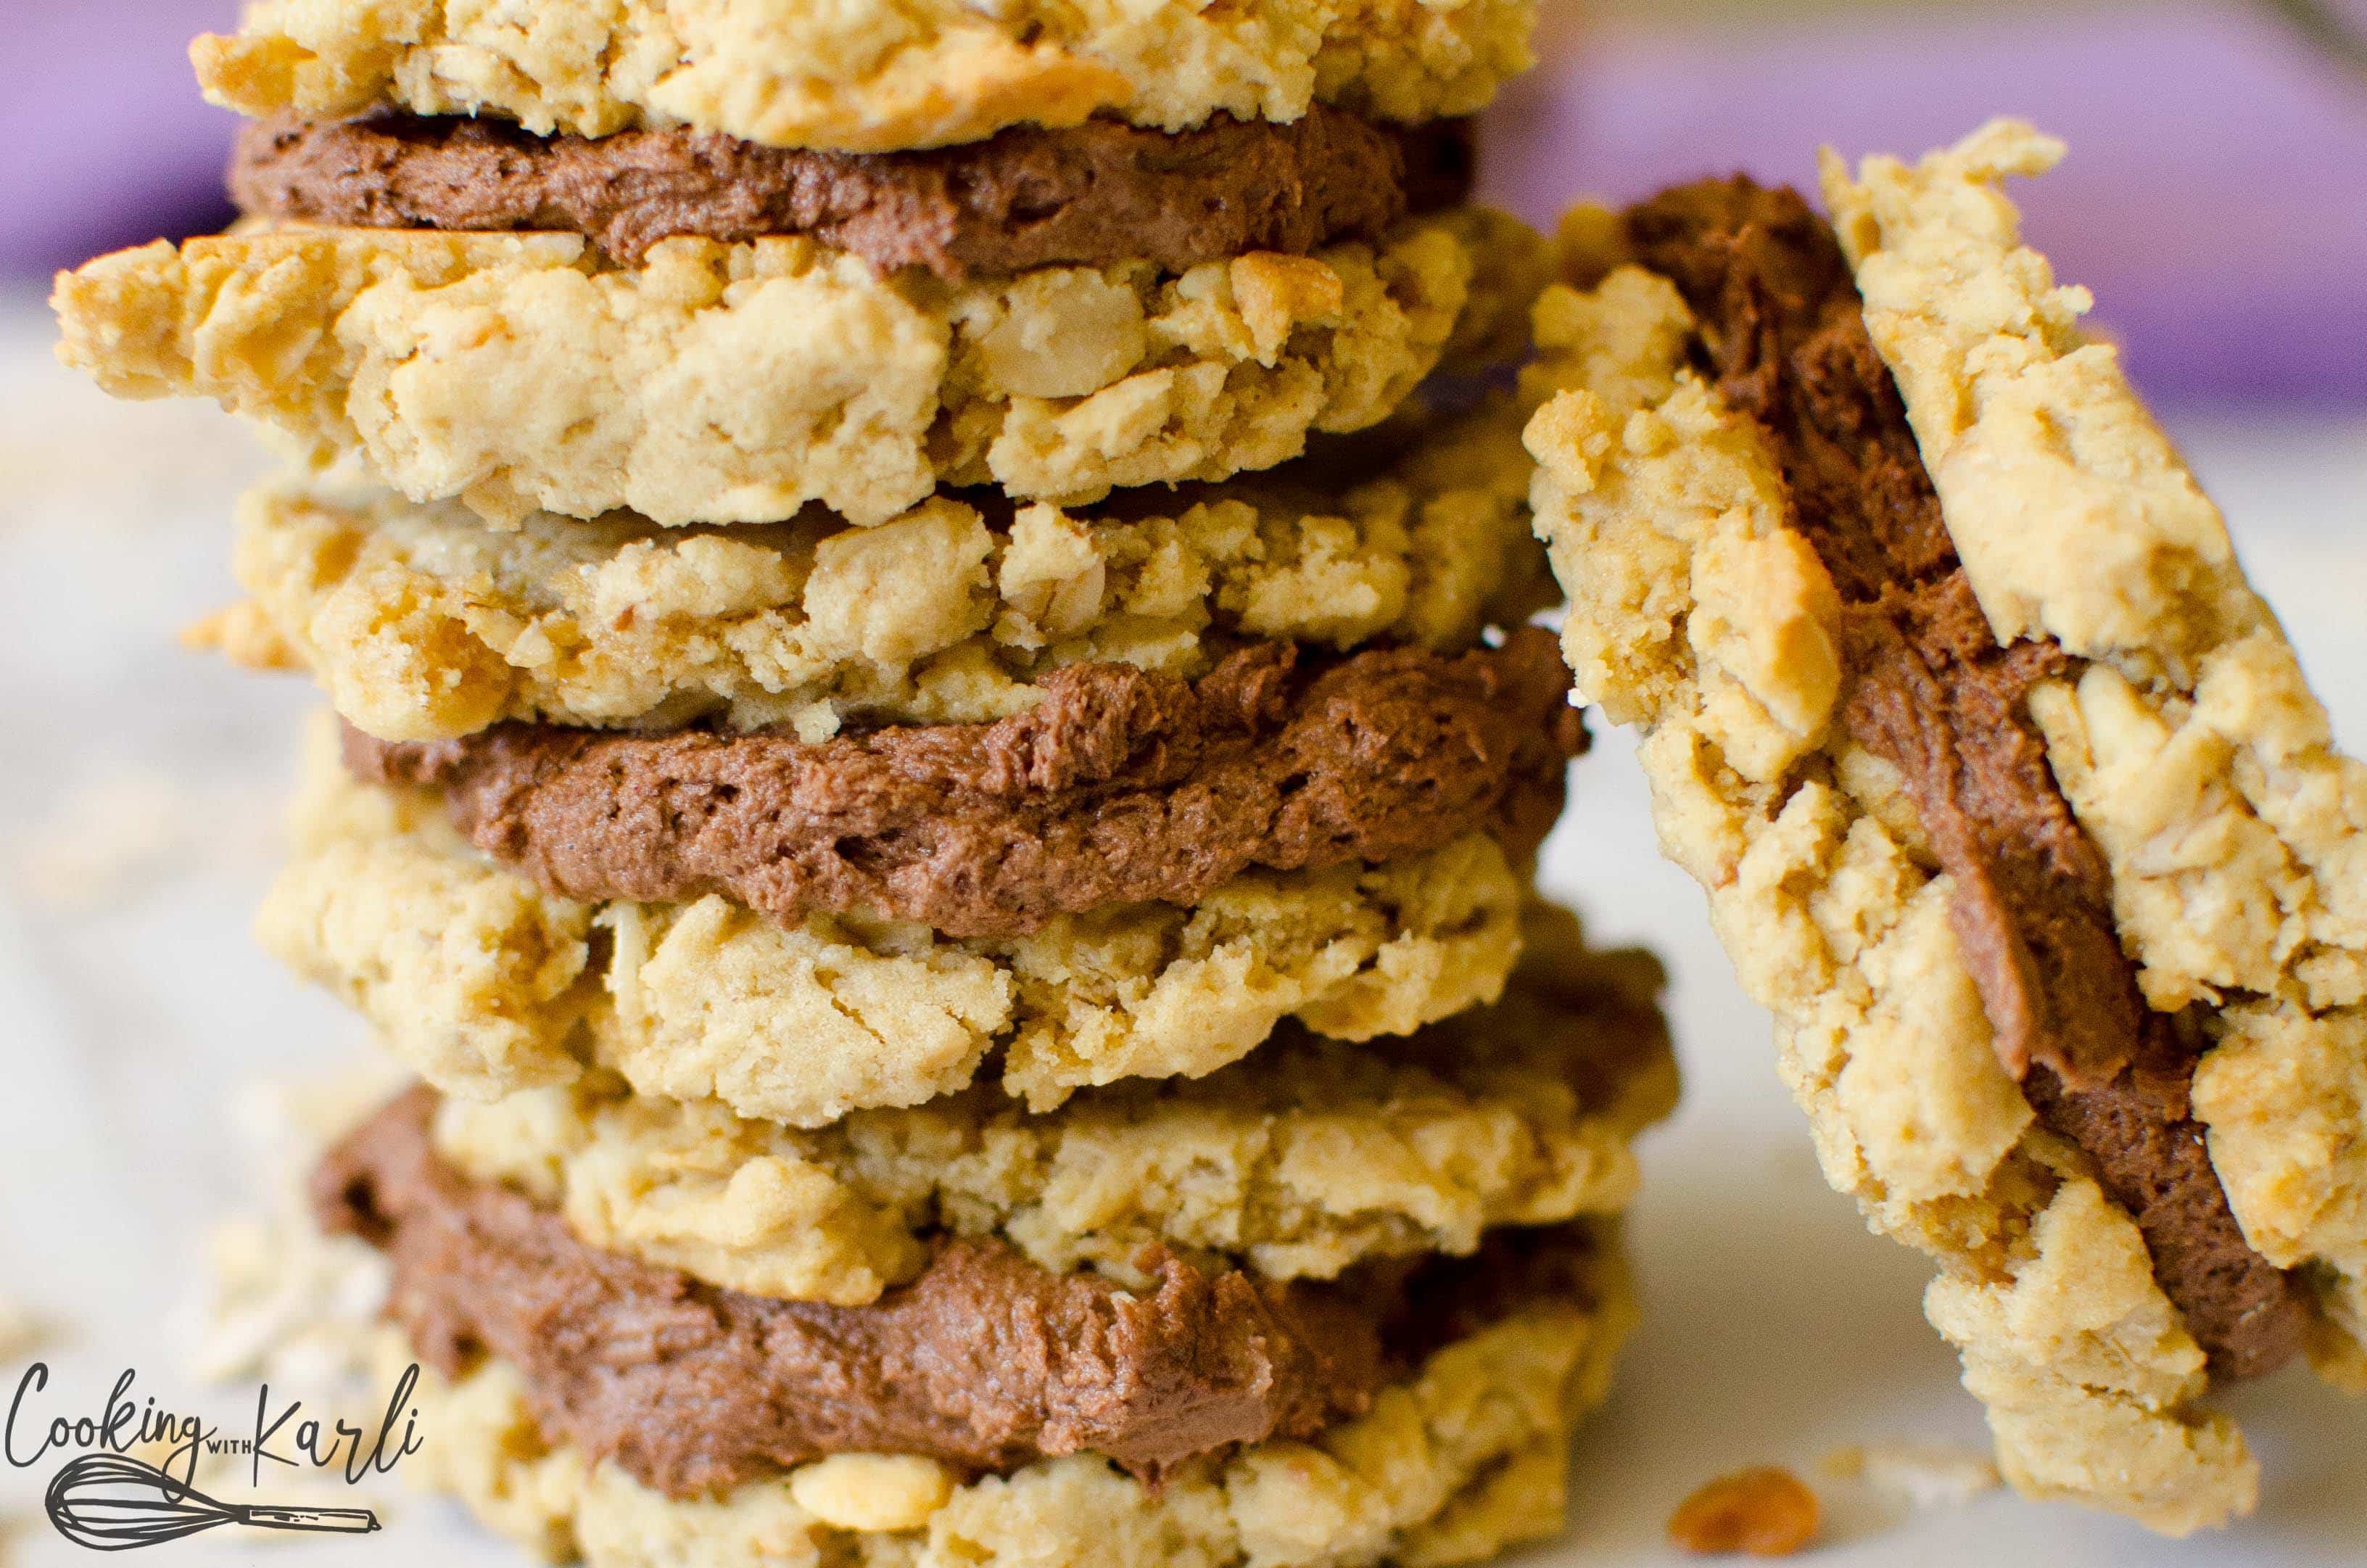 Peanut Butter Oatmeal cookies with chocolate frosting sandwiched in between make a great on the go treat.